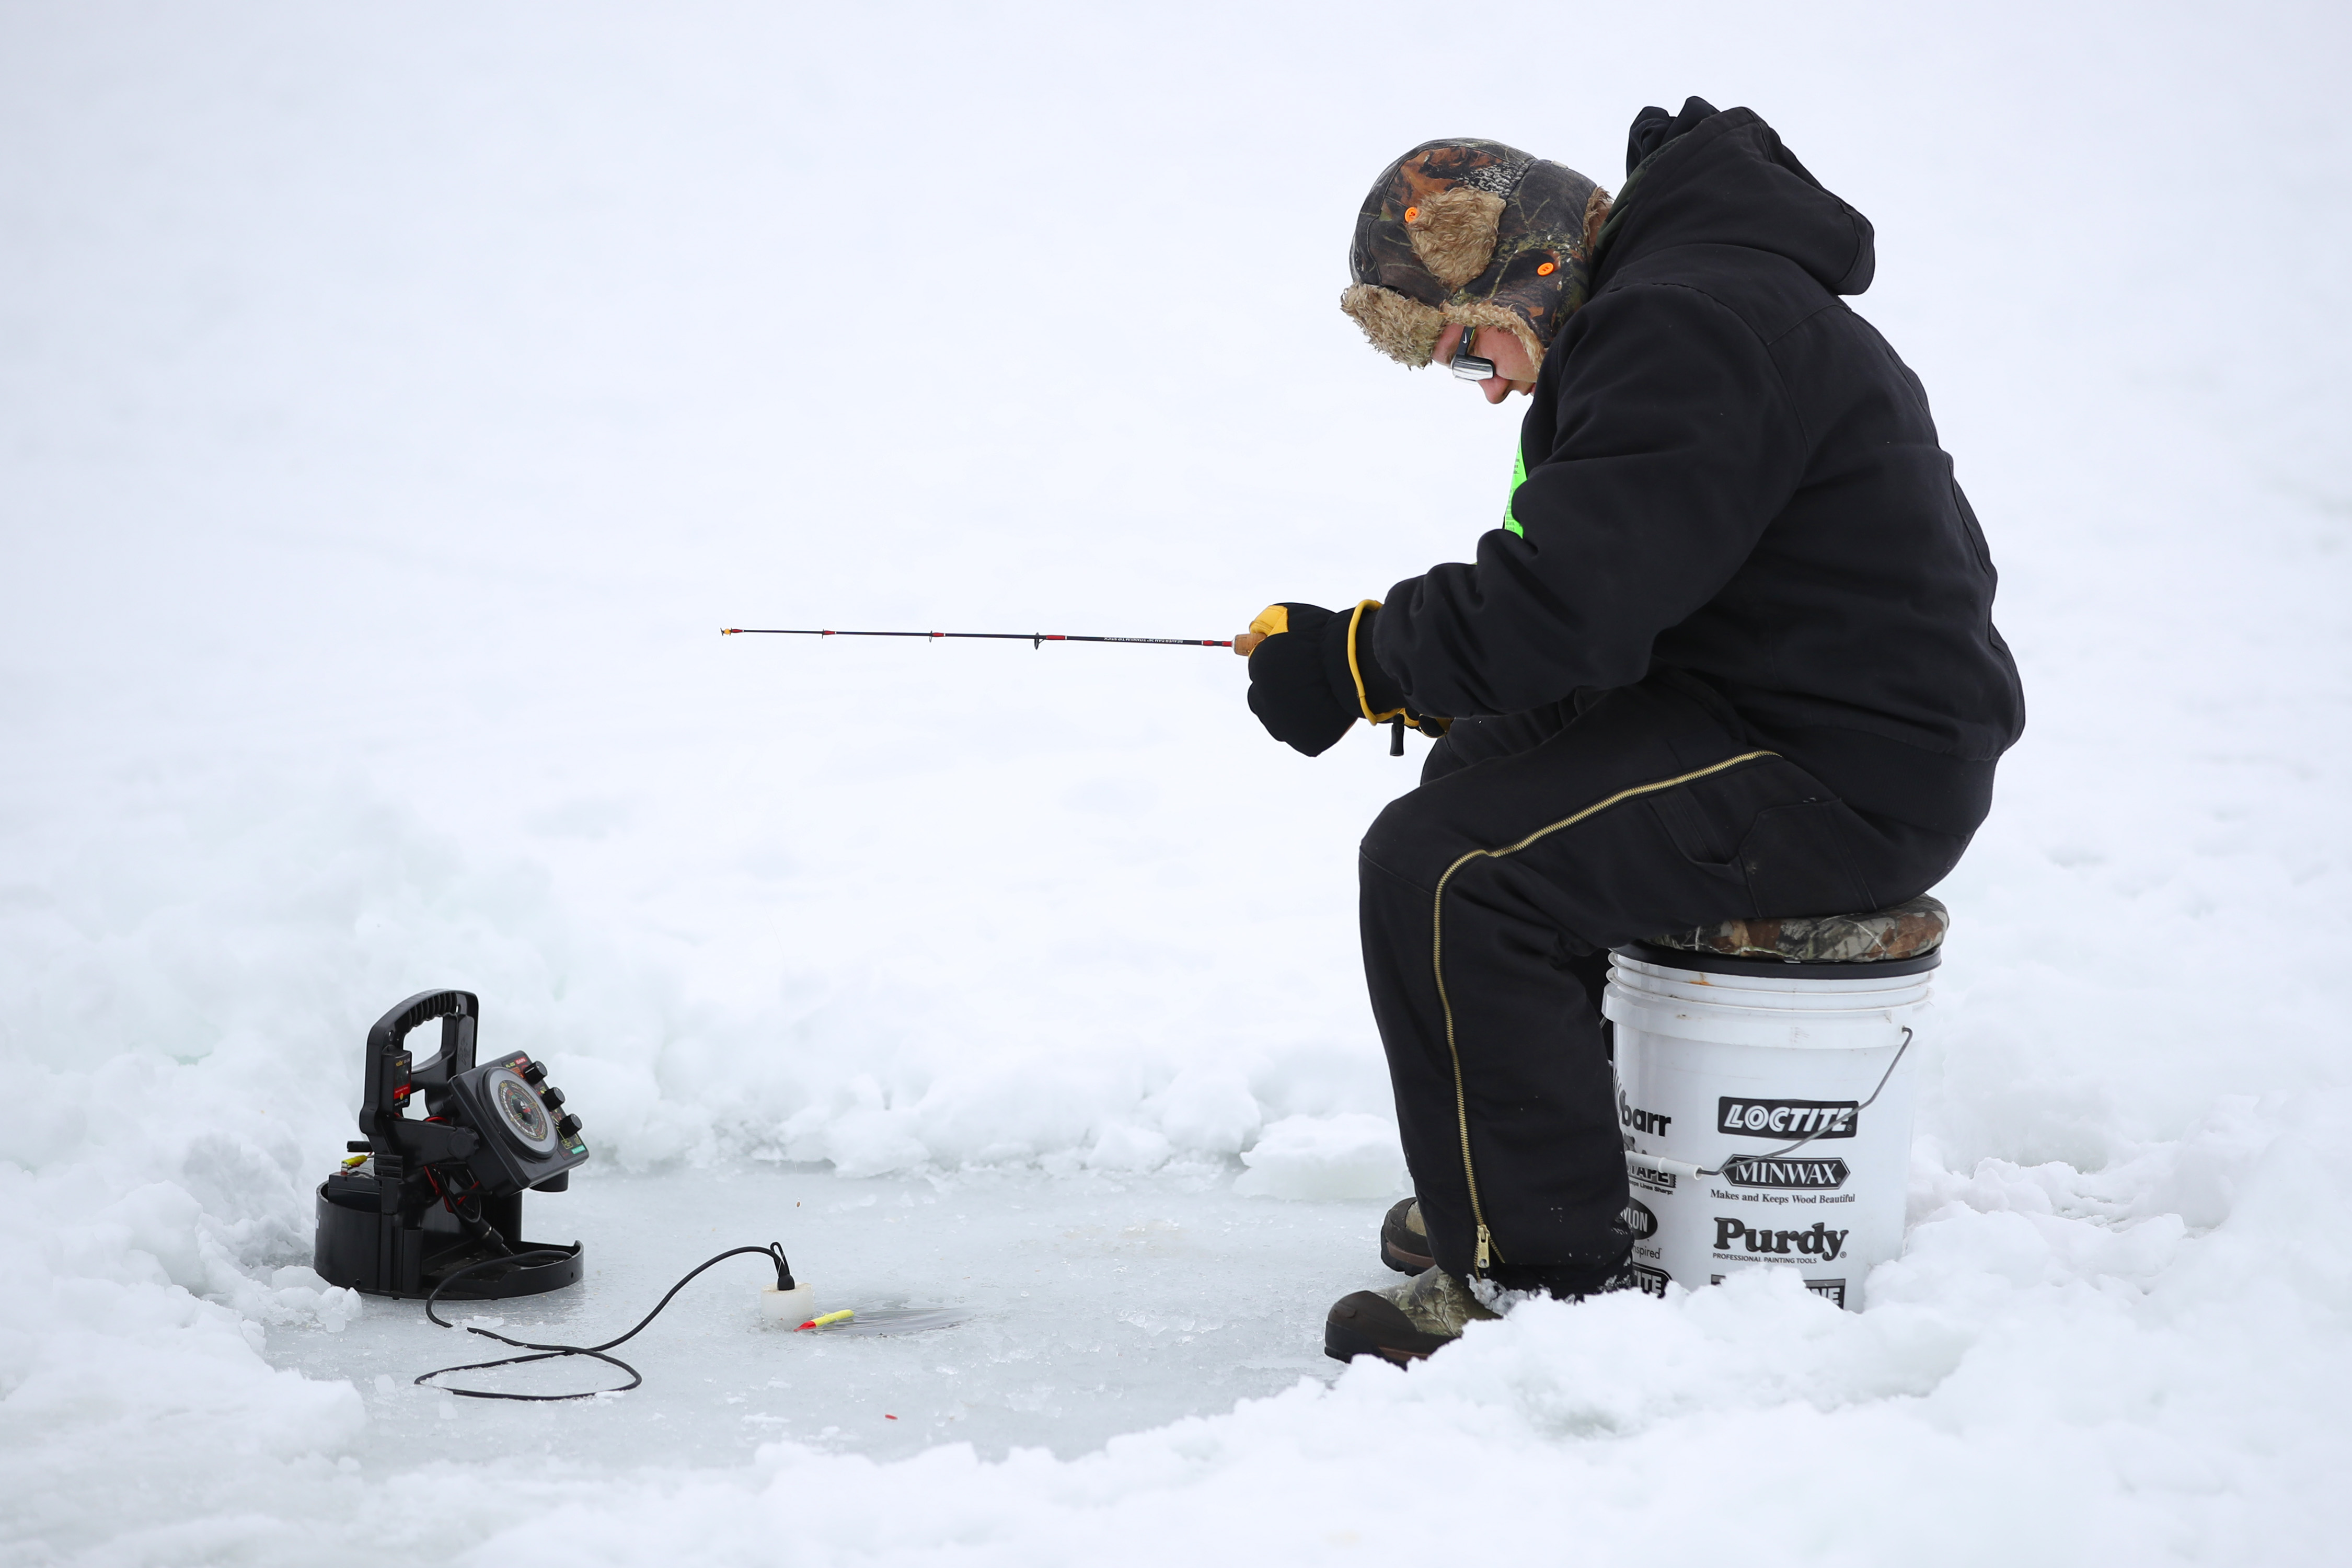 Ice fishing safety tips: How to tell if ice is safe, what to do if you fall  into a frozen lake